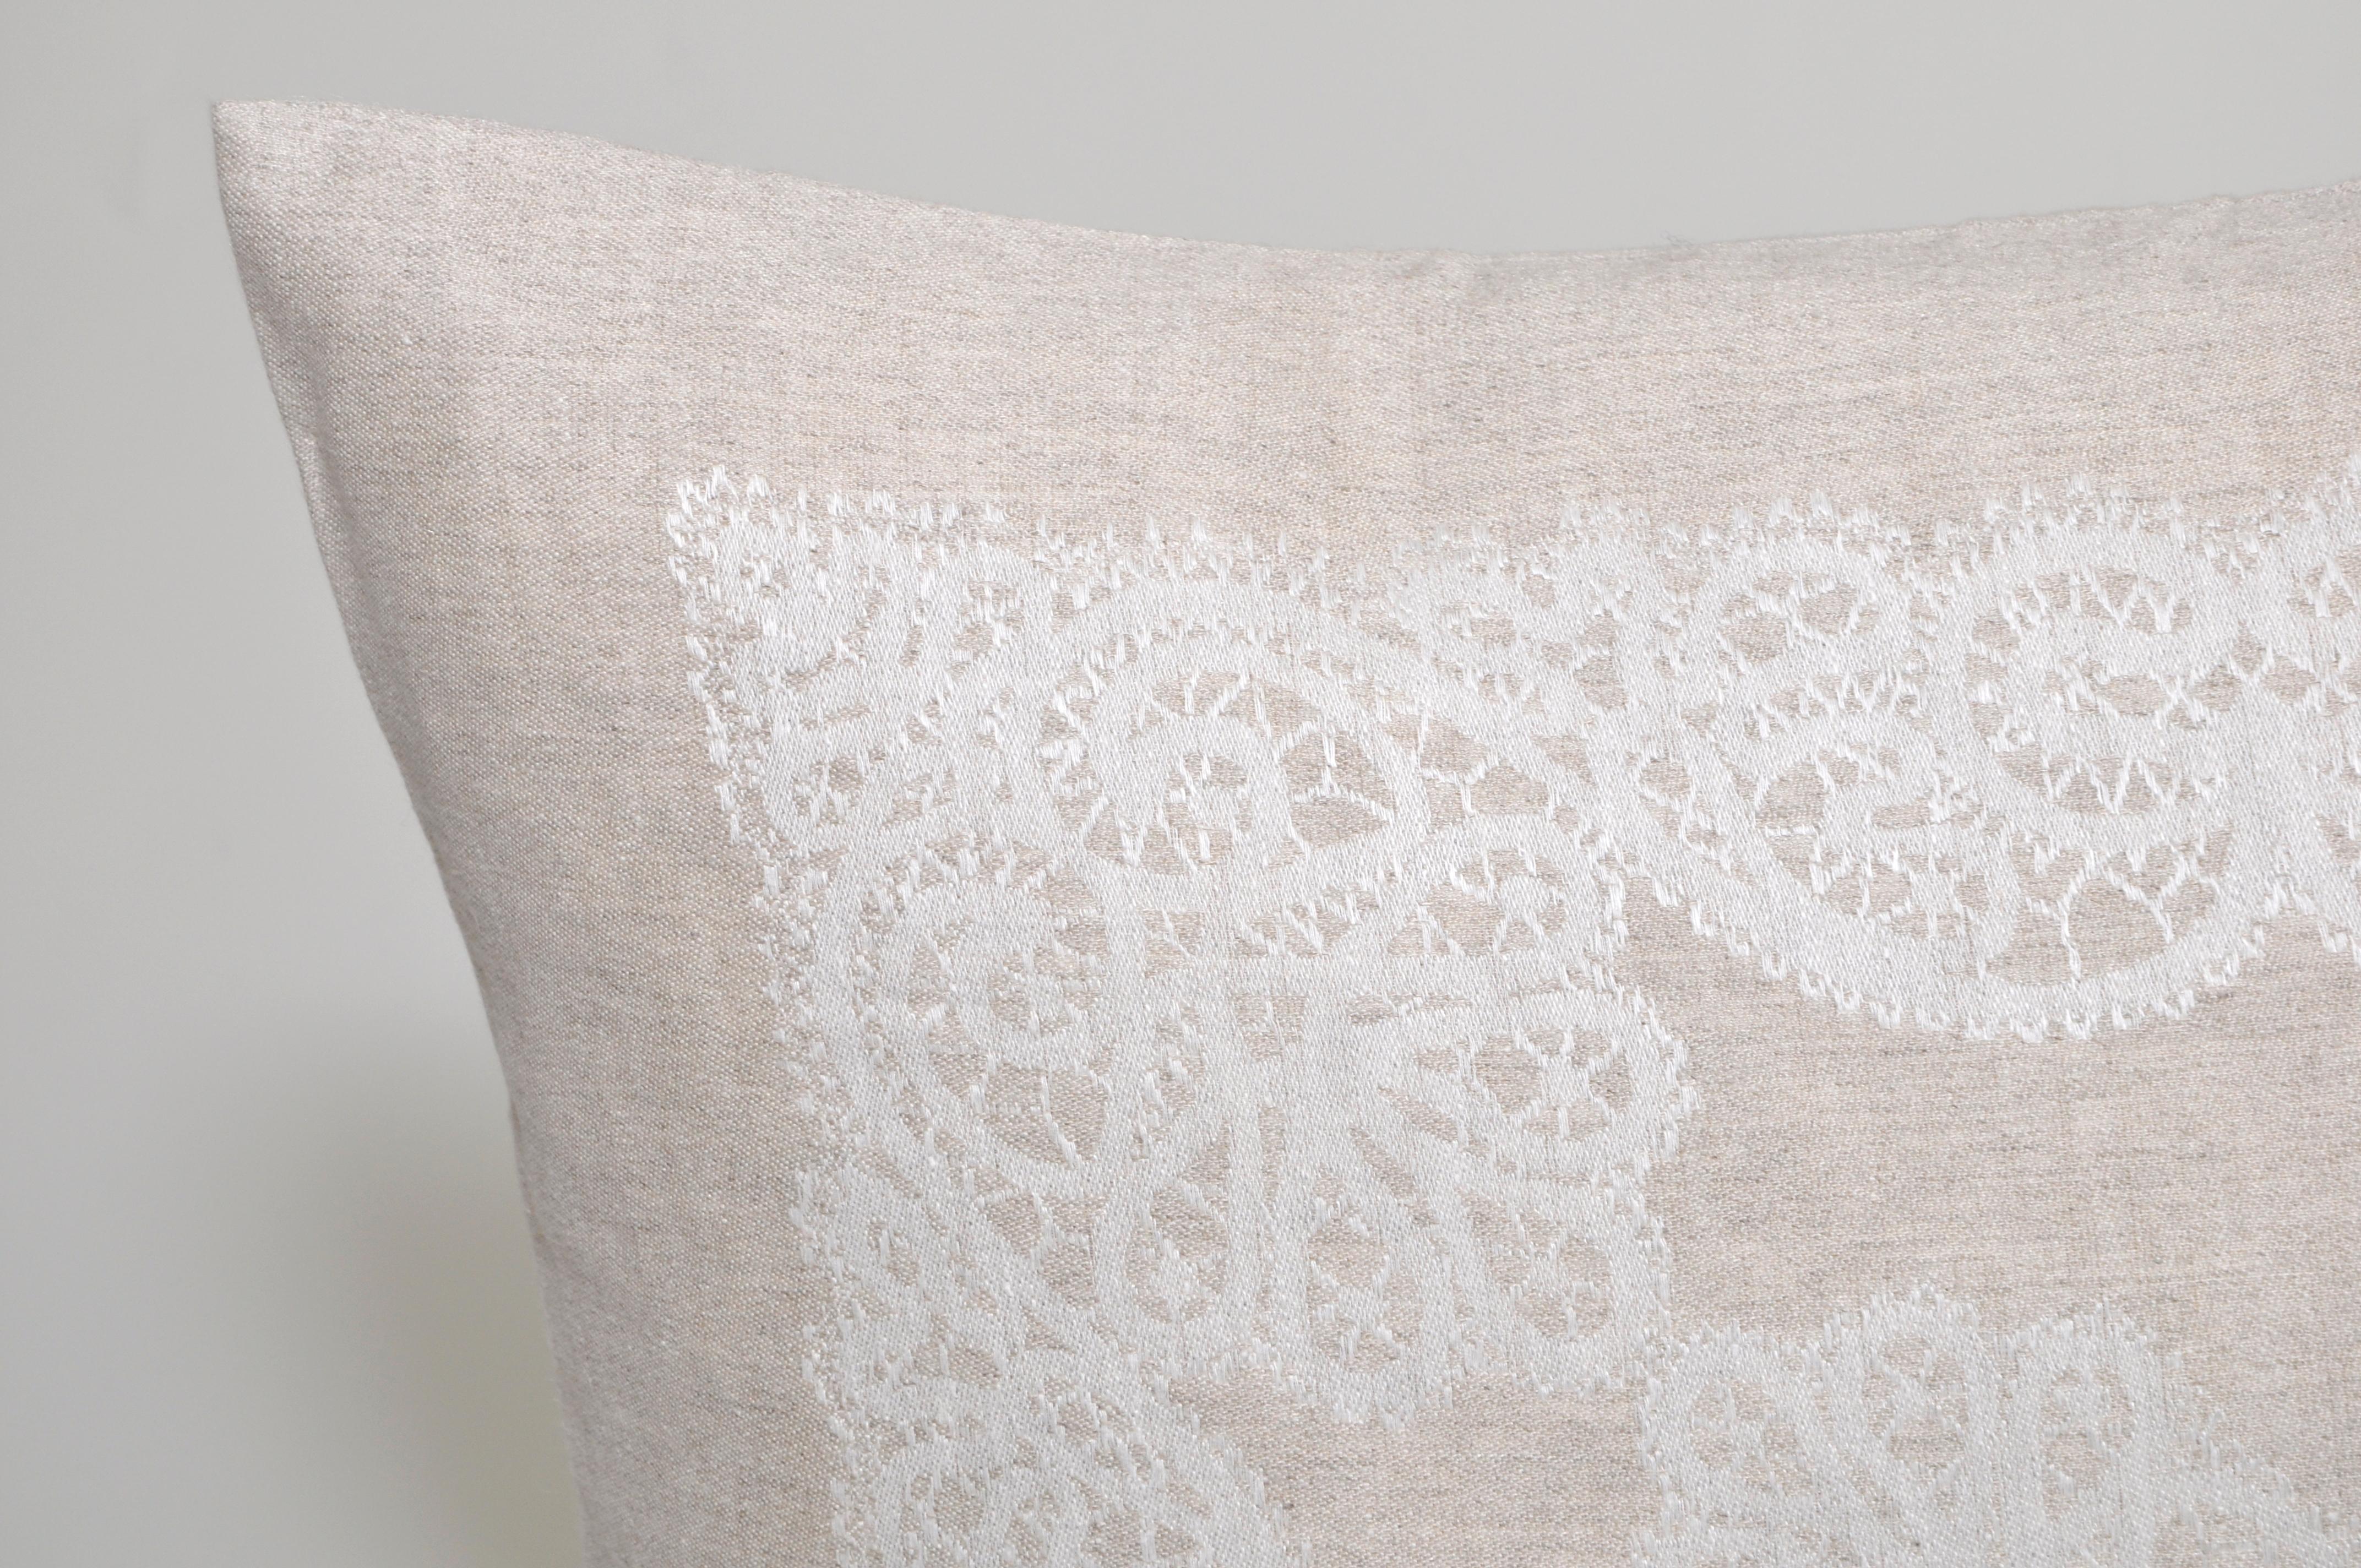 Vintage Damask traditional Celtic lacework patterned Irish linen cushion pillow

A luxury cushion (pillow) constructed with vintage elements. The cloth has a mesmerisingly beautiful texture with visible grain in a Classic natural oatmeal